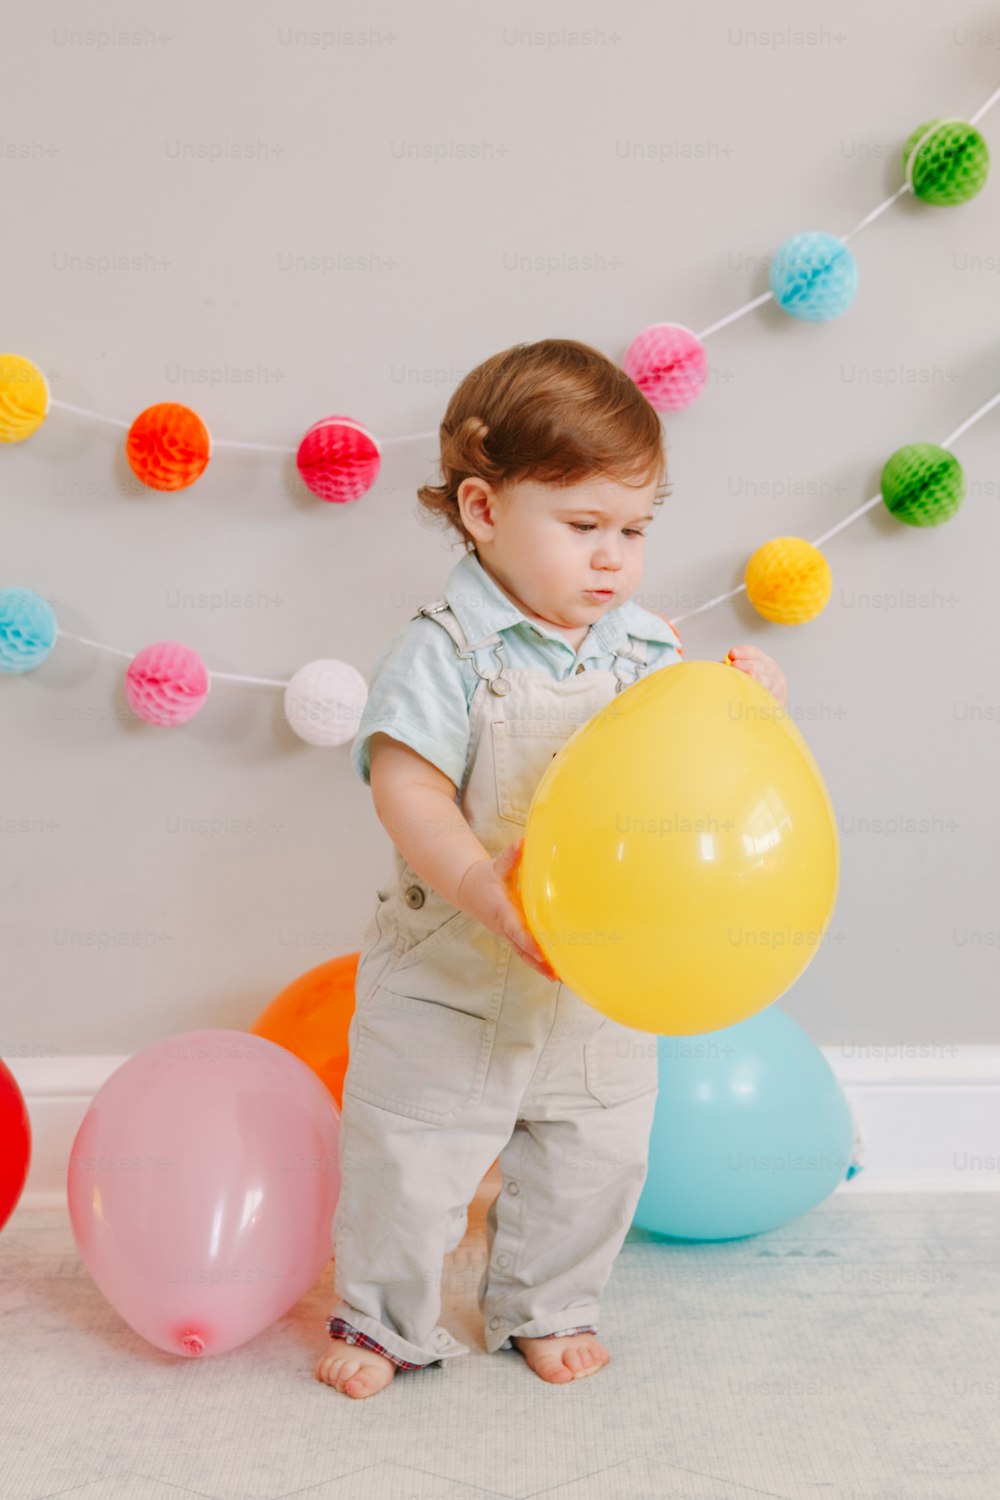 500+ Baby Birthday Pictures [HD] | Download Free Images on Unsplash